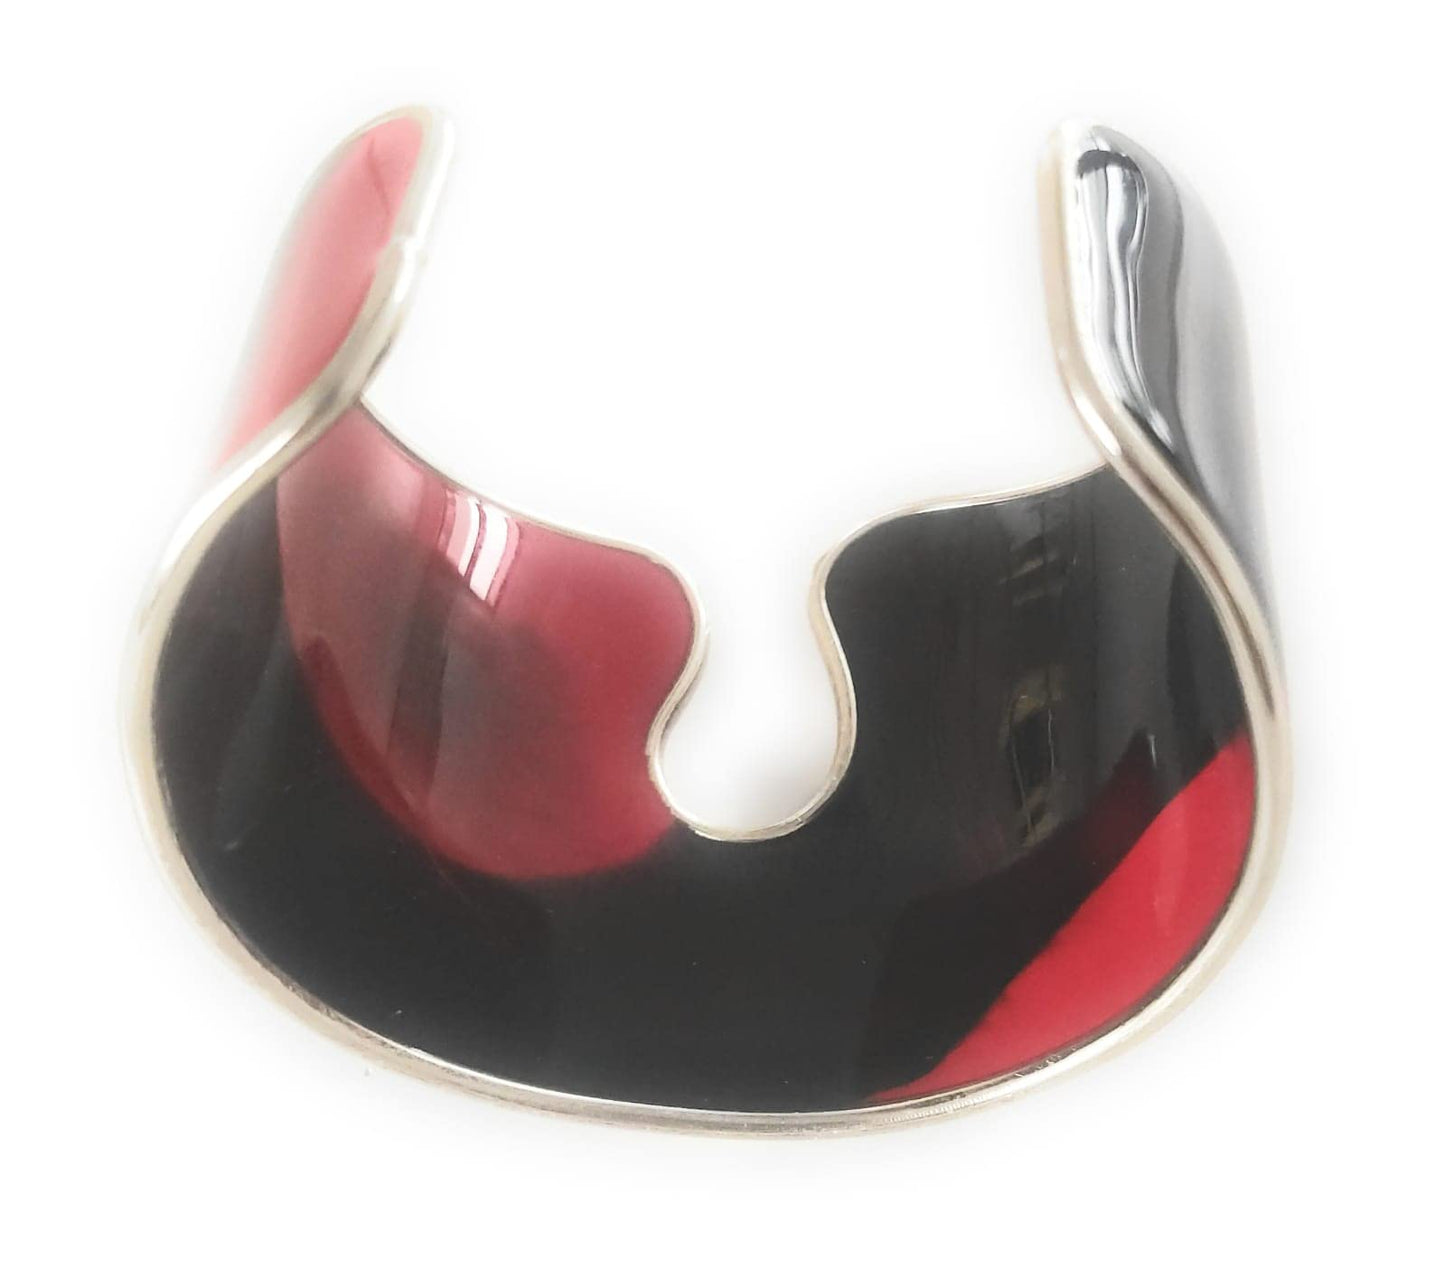 Rigid bracelet in surgical steel and epoxy resin, handmade jewel, Vulca collection (red / black) 